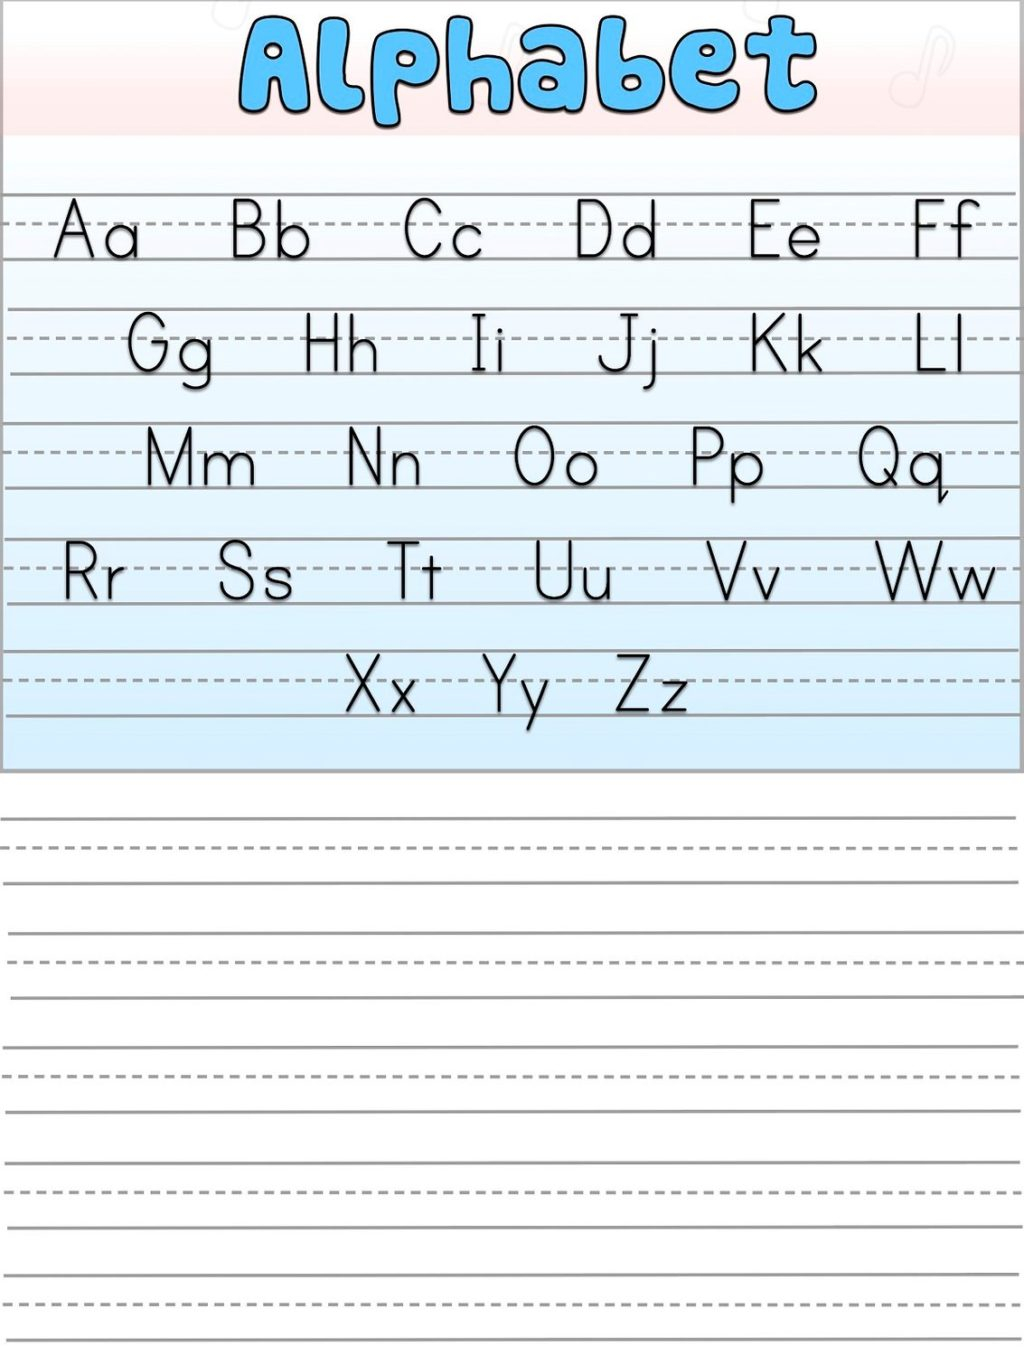 Alphabet Writing Practice Sheet Free Worksheets Pdf Download with Alphabet Tracing Worksheets Pdf Download